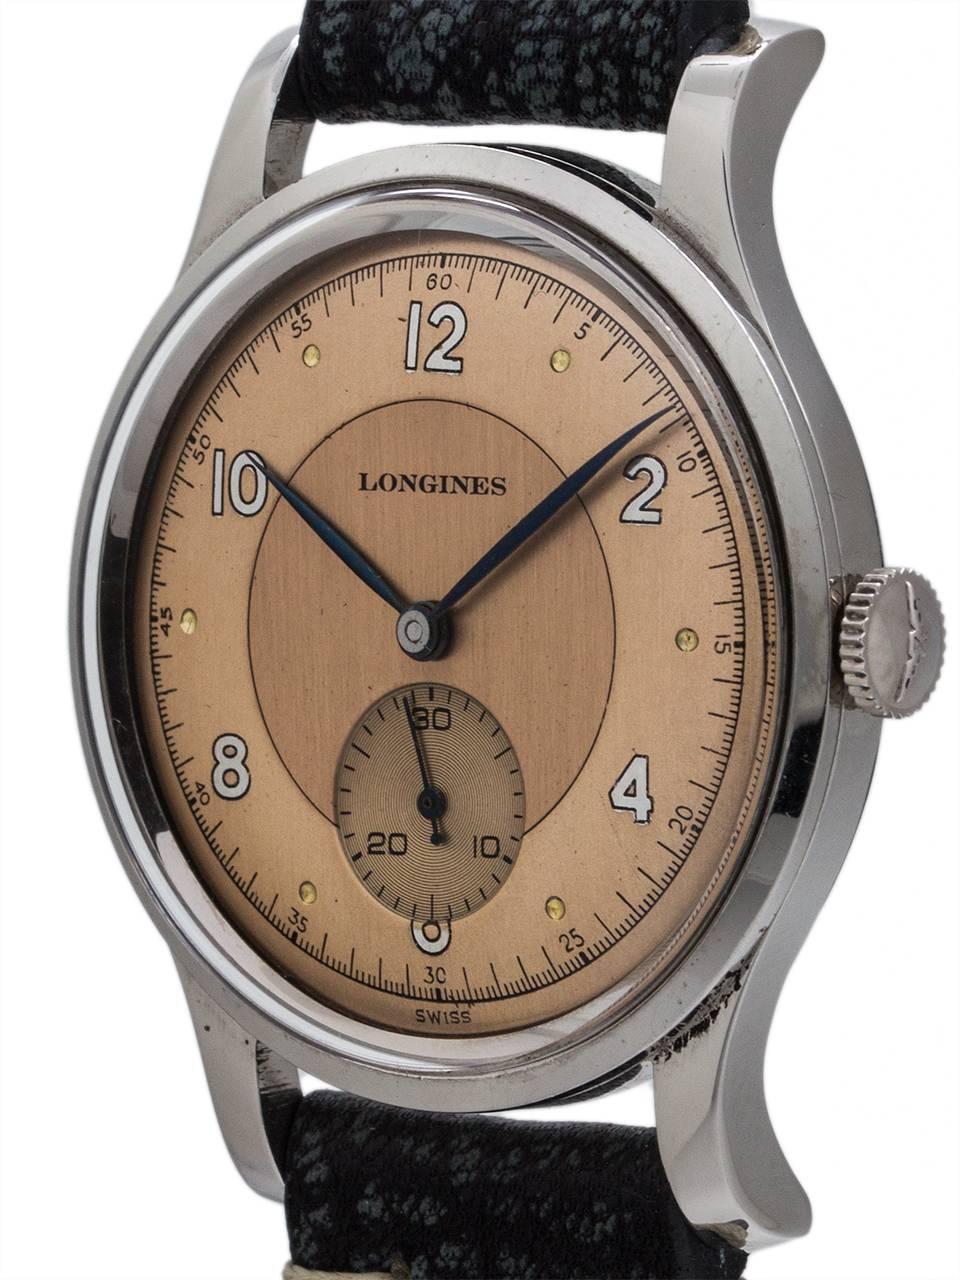 Vintage Longines Calatrava military case style model circa 1946. Featuring 35 x 43mm robust design case with sloped bezel, heavy turned lugs, and snap on caseback. With beautifully restored 2 tone rose dial with mirror printed silver indexes and